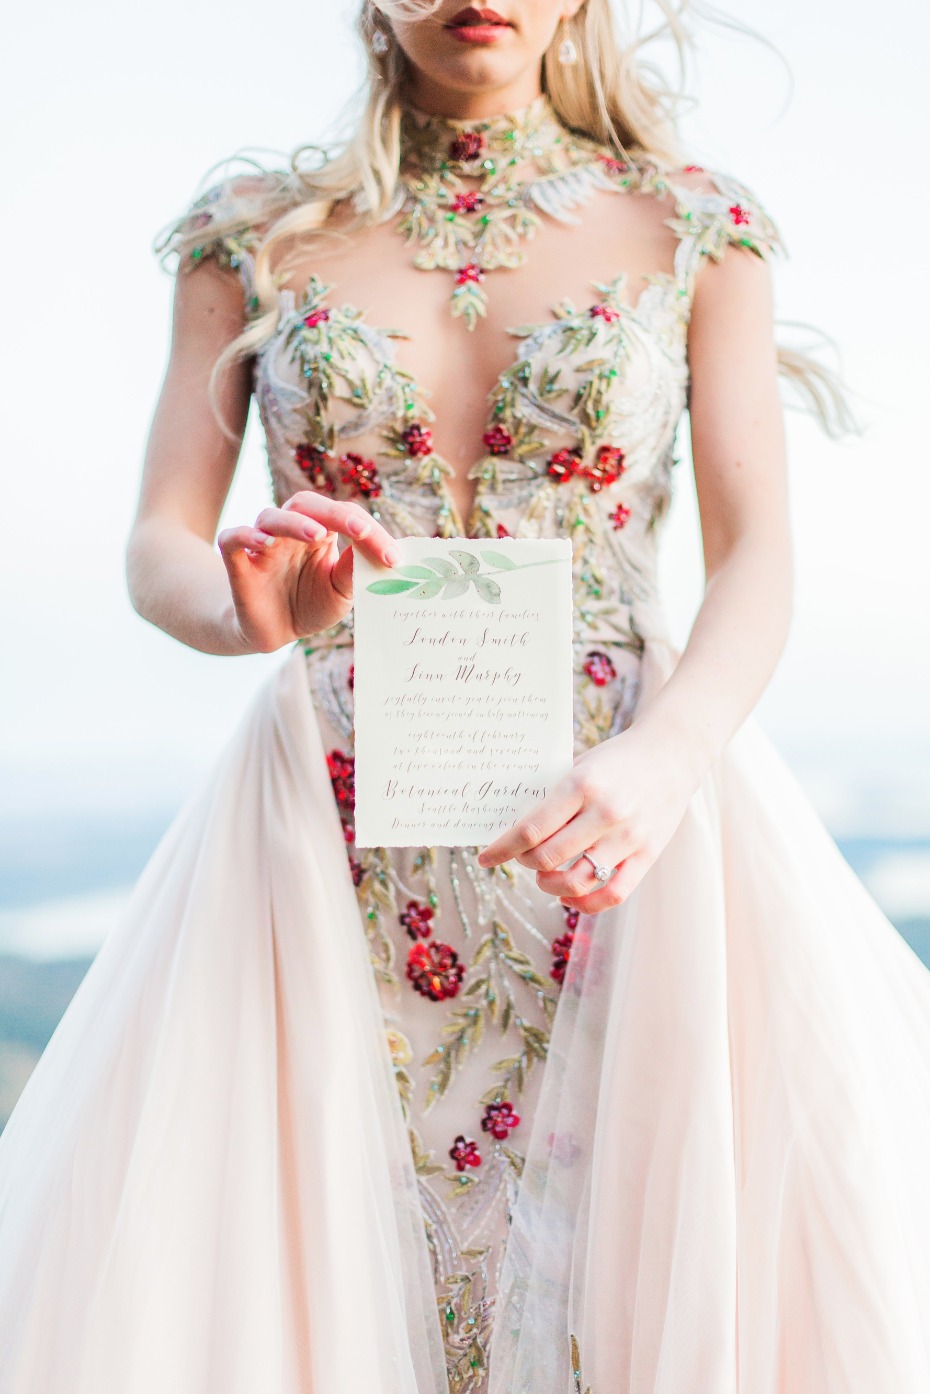 wedding invitation and insanely embroidered wedding gown